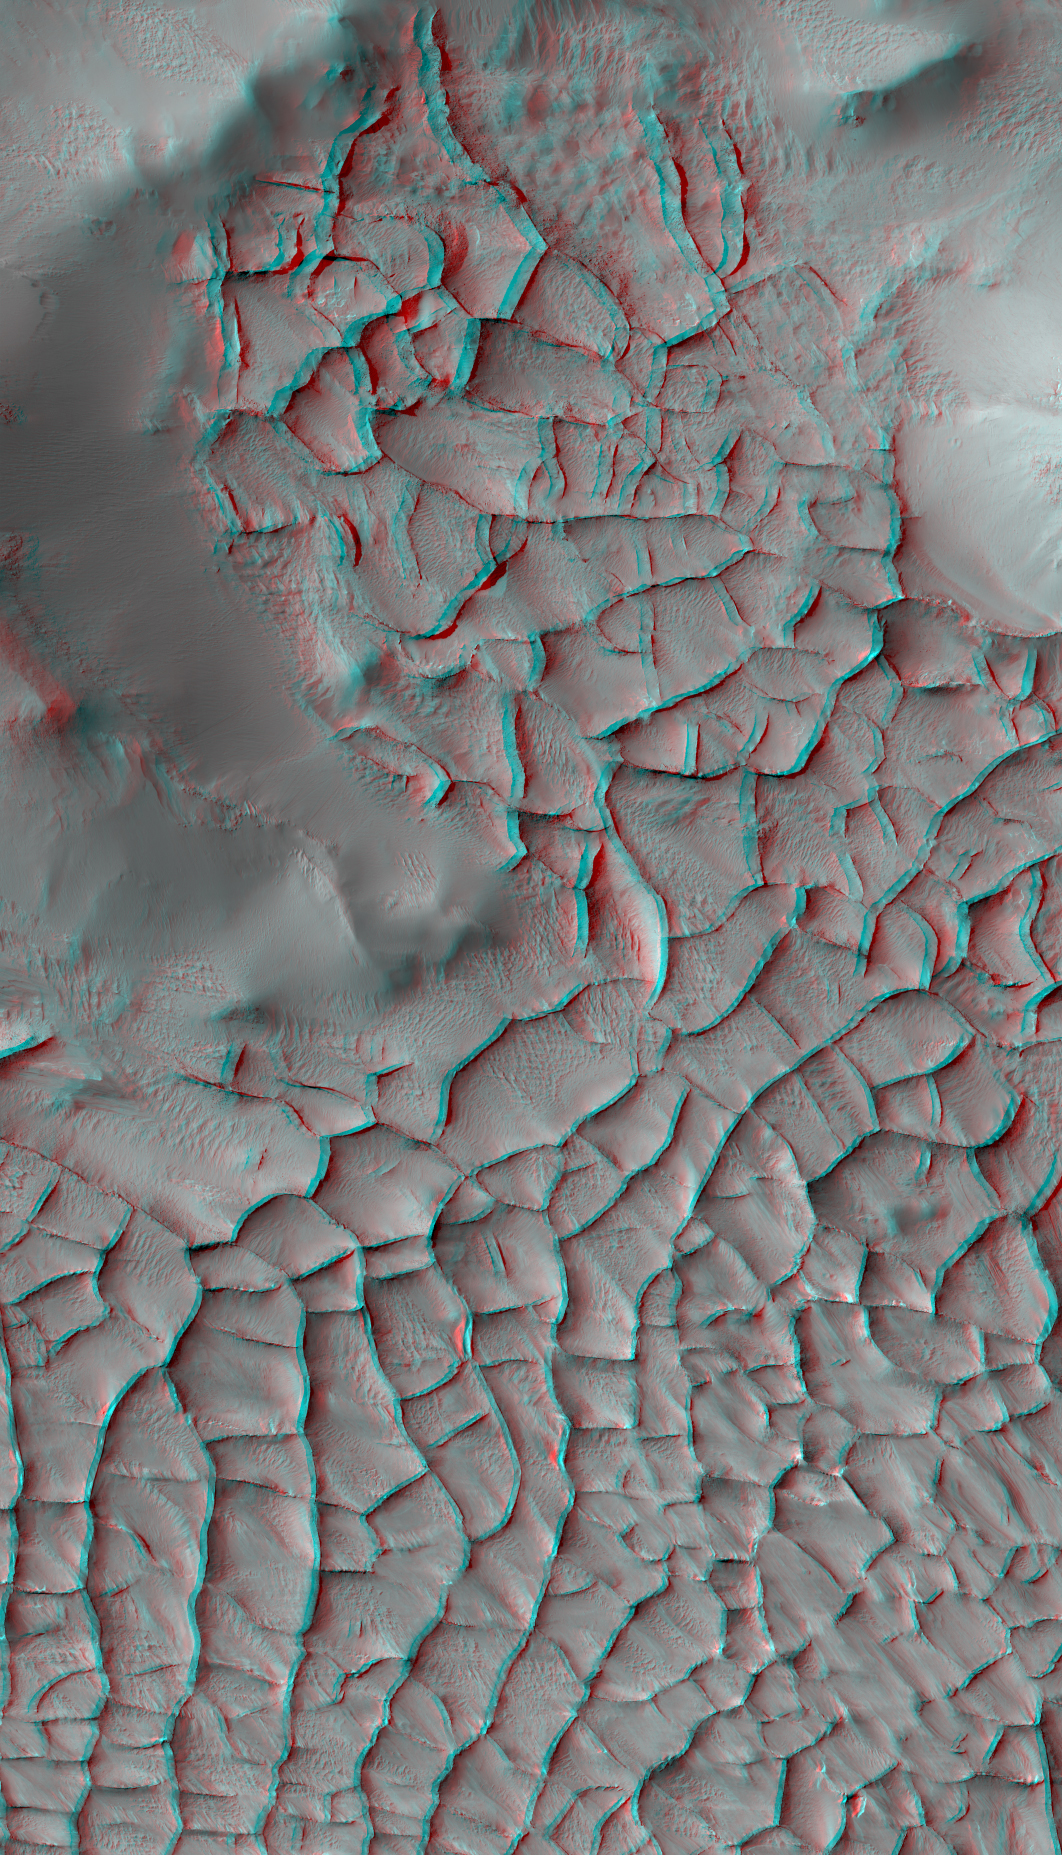 This stereo view shows an area on Mars where narrow rock ridges intersect at angles forming corners of polygons. It combines two observations from the HiRISE camera on NASA's Mars Reconnaissance Orbiter and appears three-dimensional when viewed through red-blue glasses with the red lens on the left.